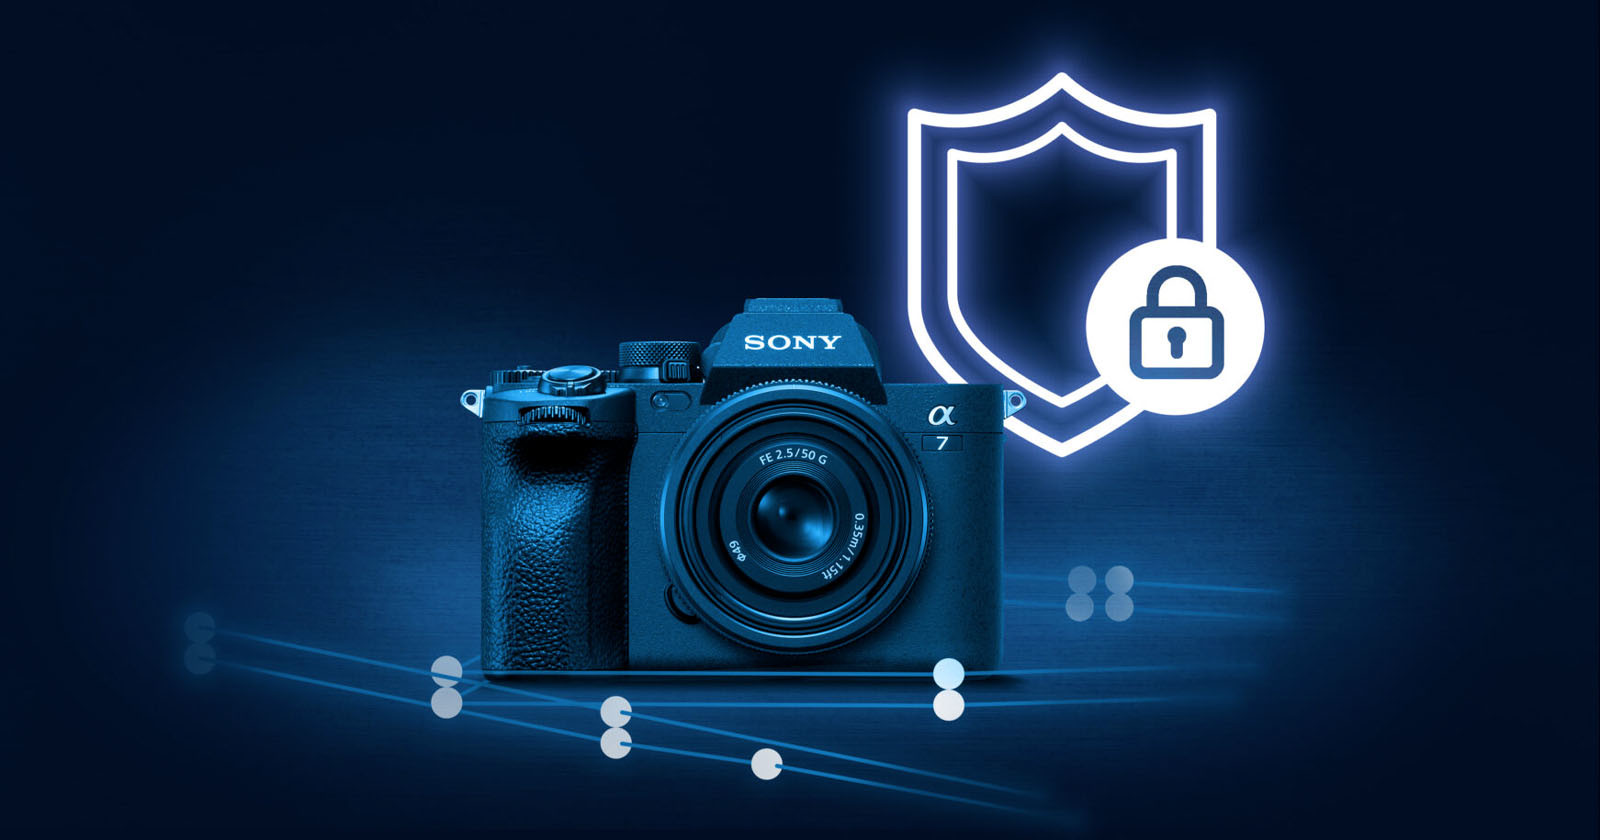  sony forgery-proof tech adds crypto signature photos in-camera 